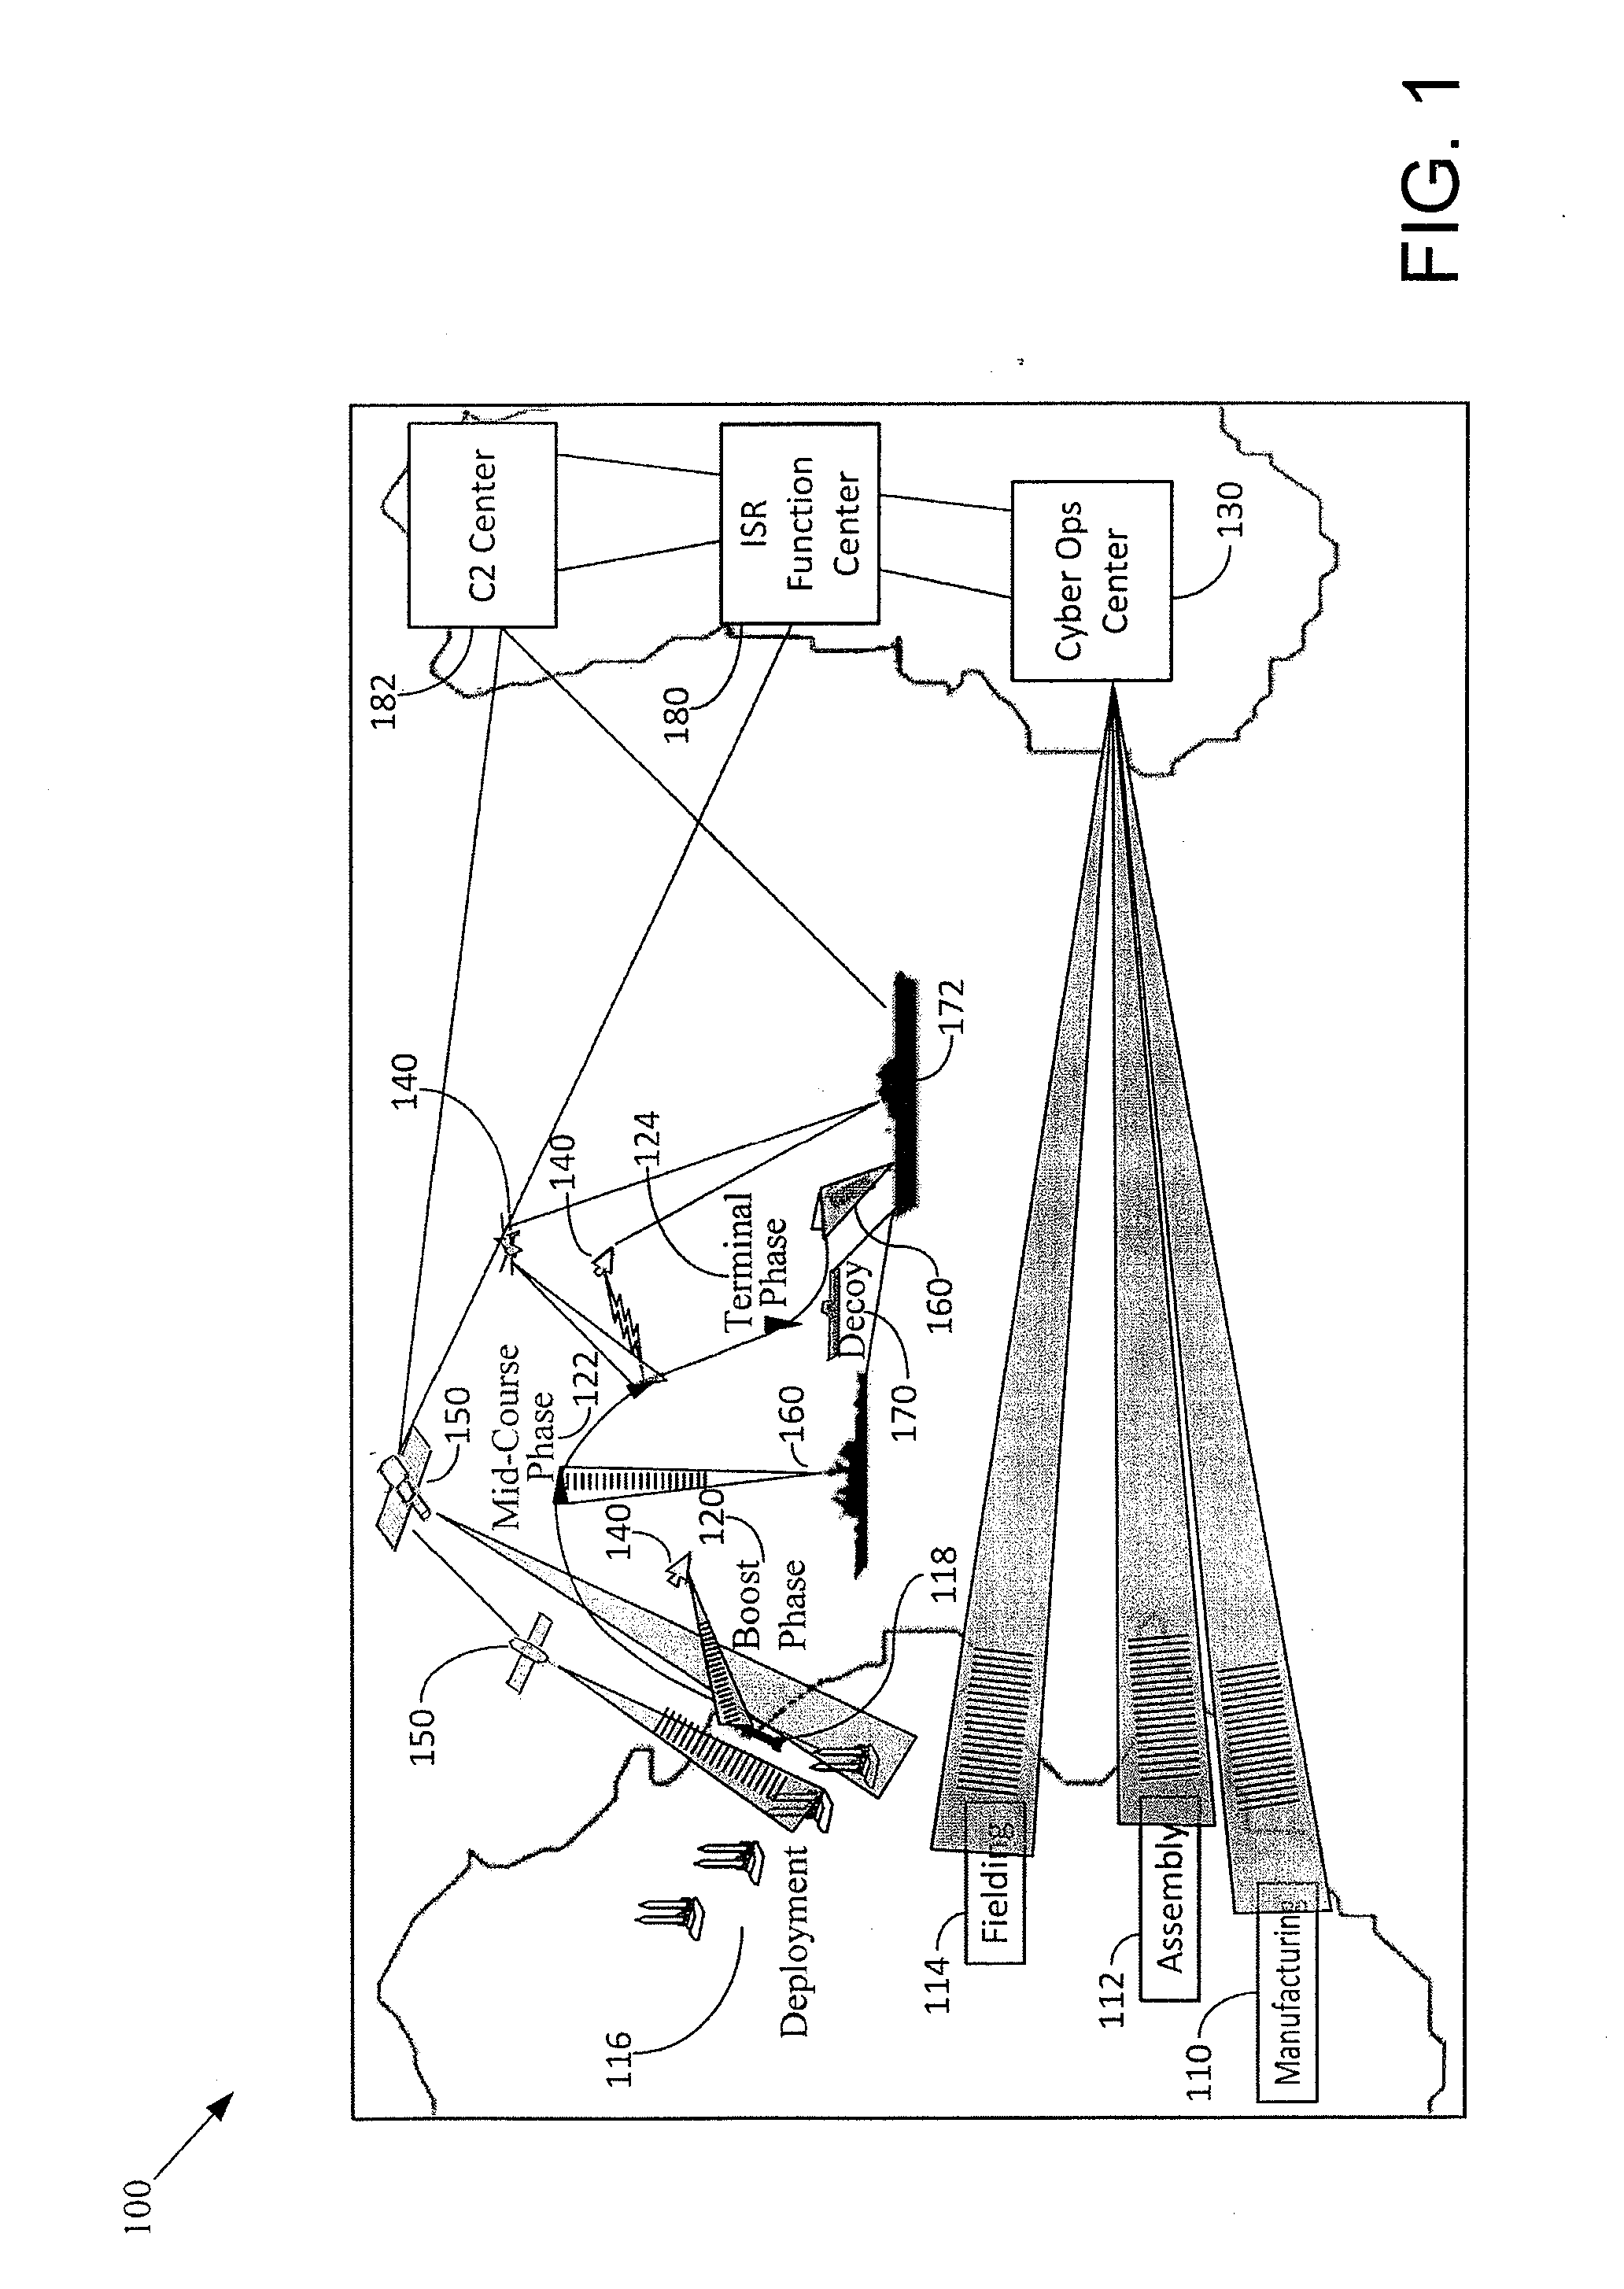 System and method for asymmetric missile defense